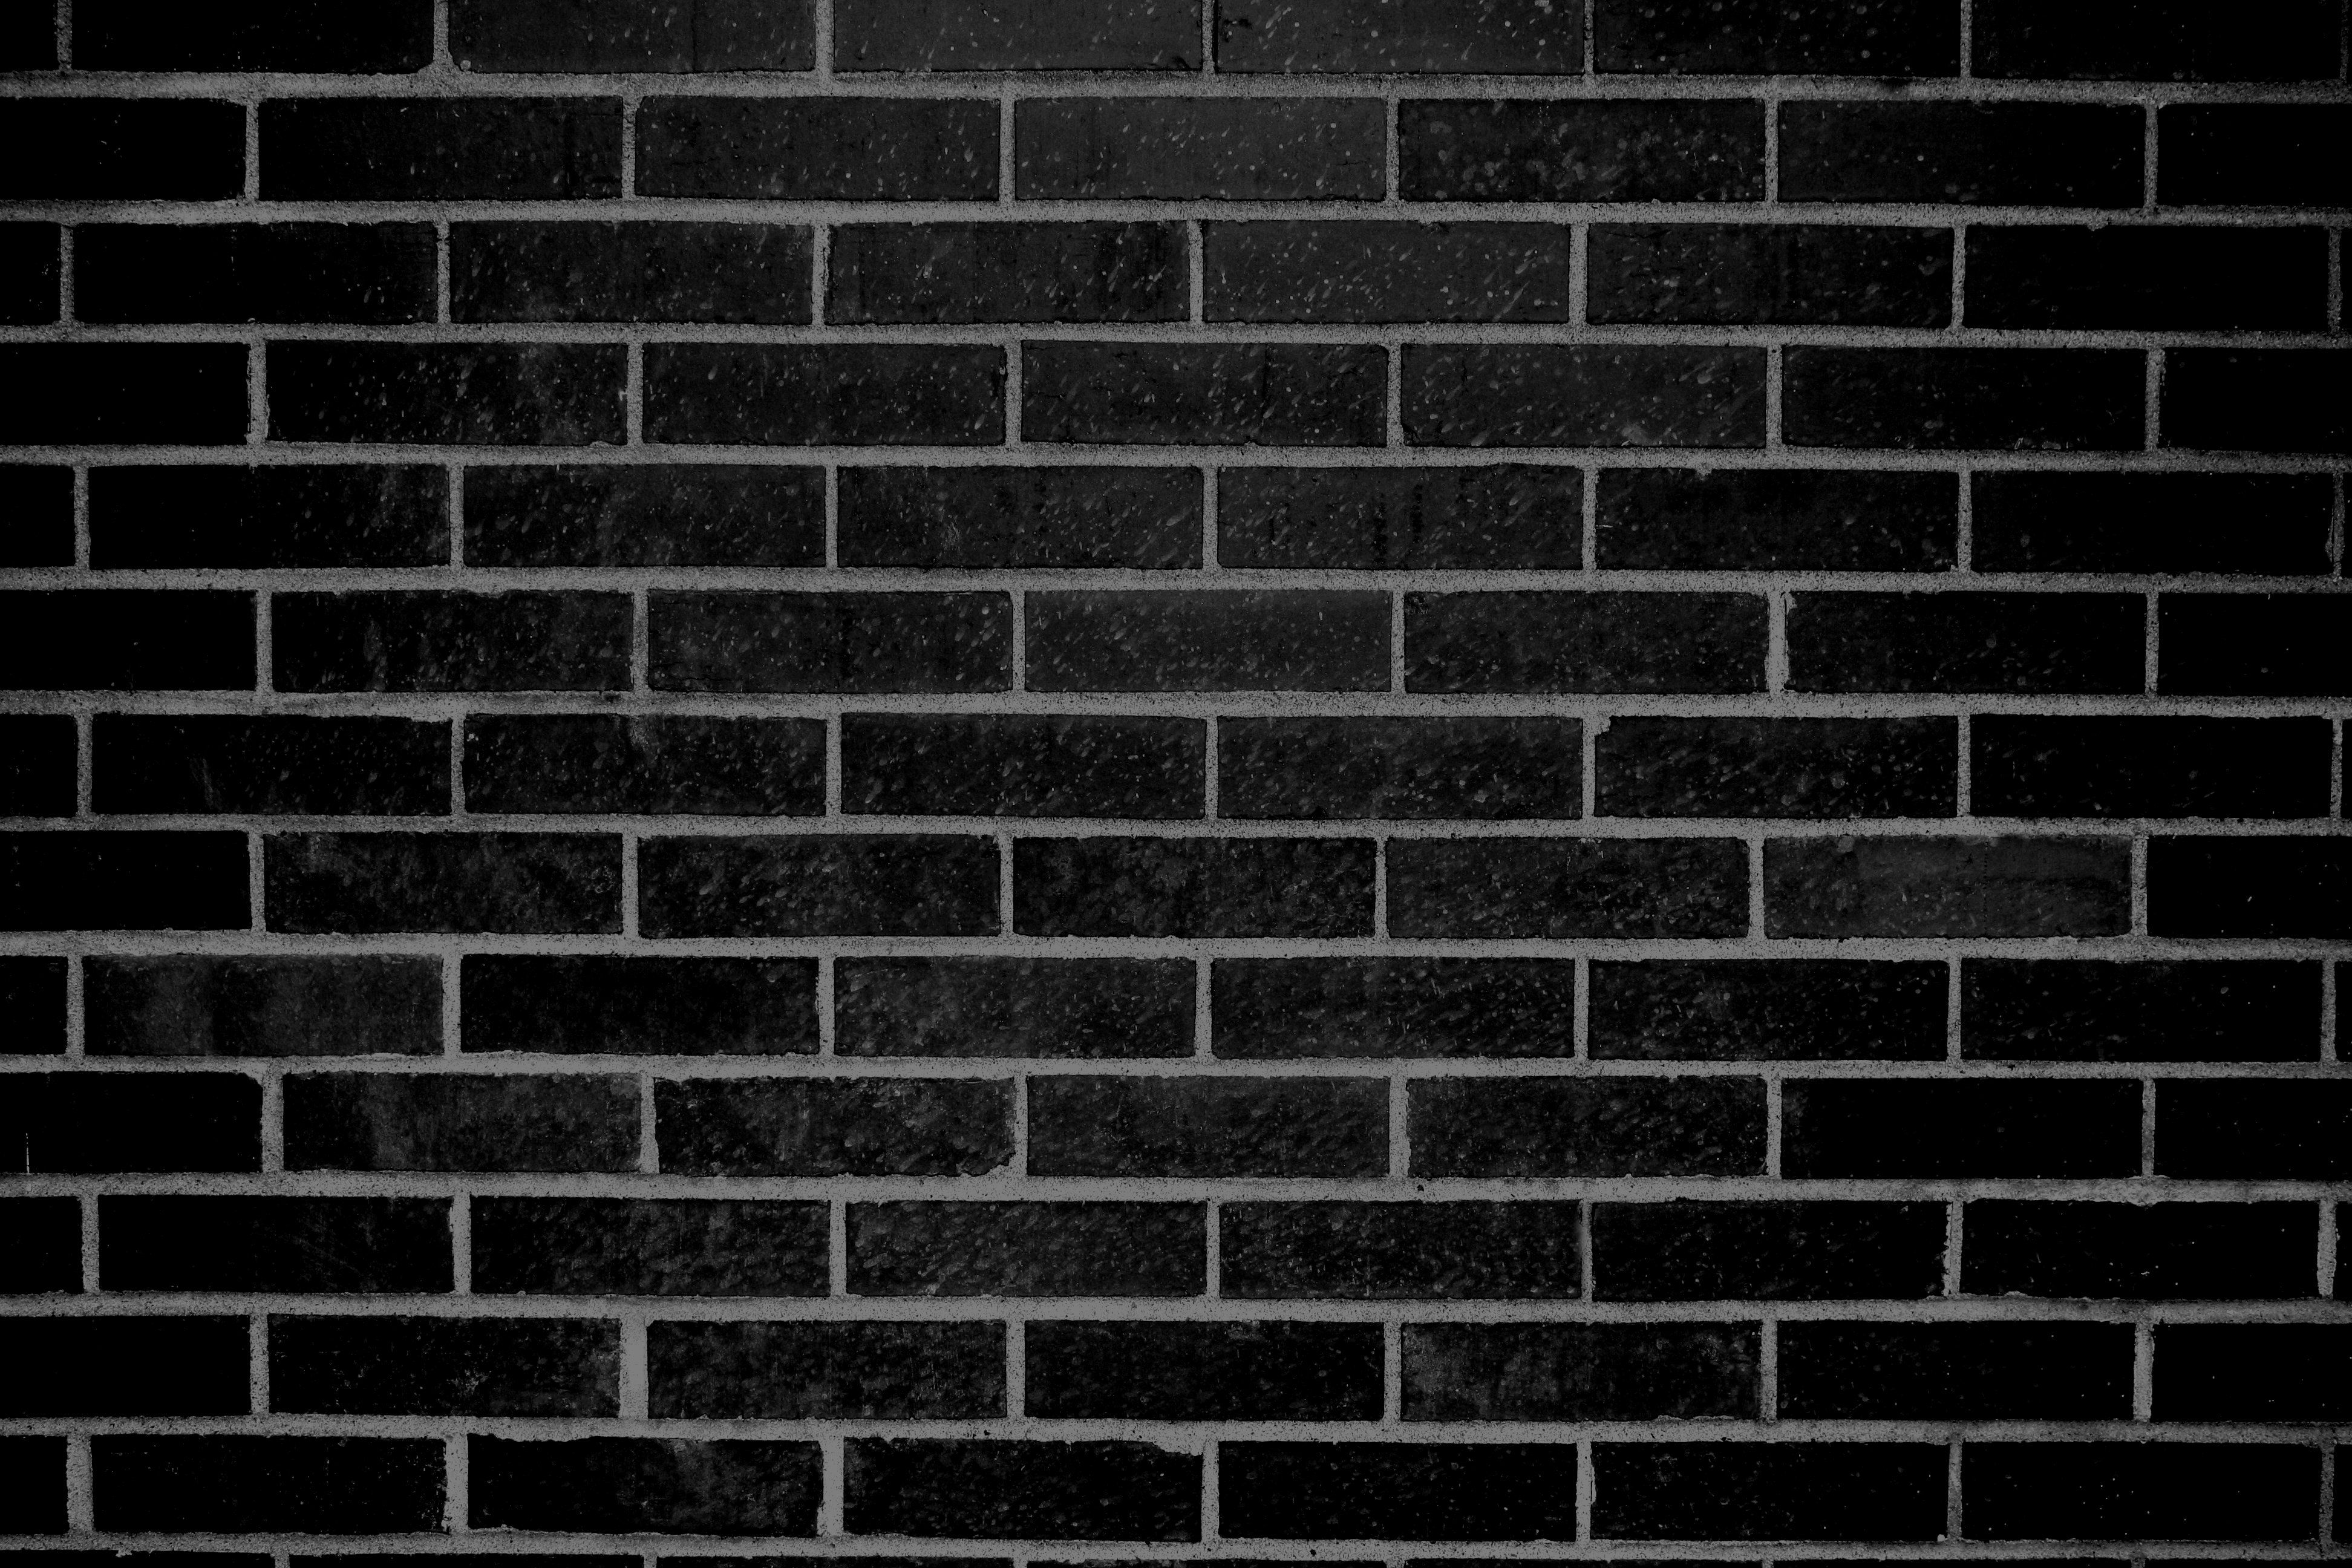 Black Brick Wall Texture Picture. Free